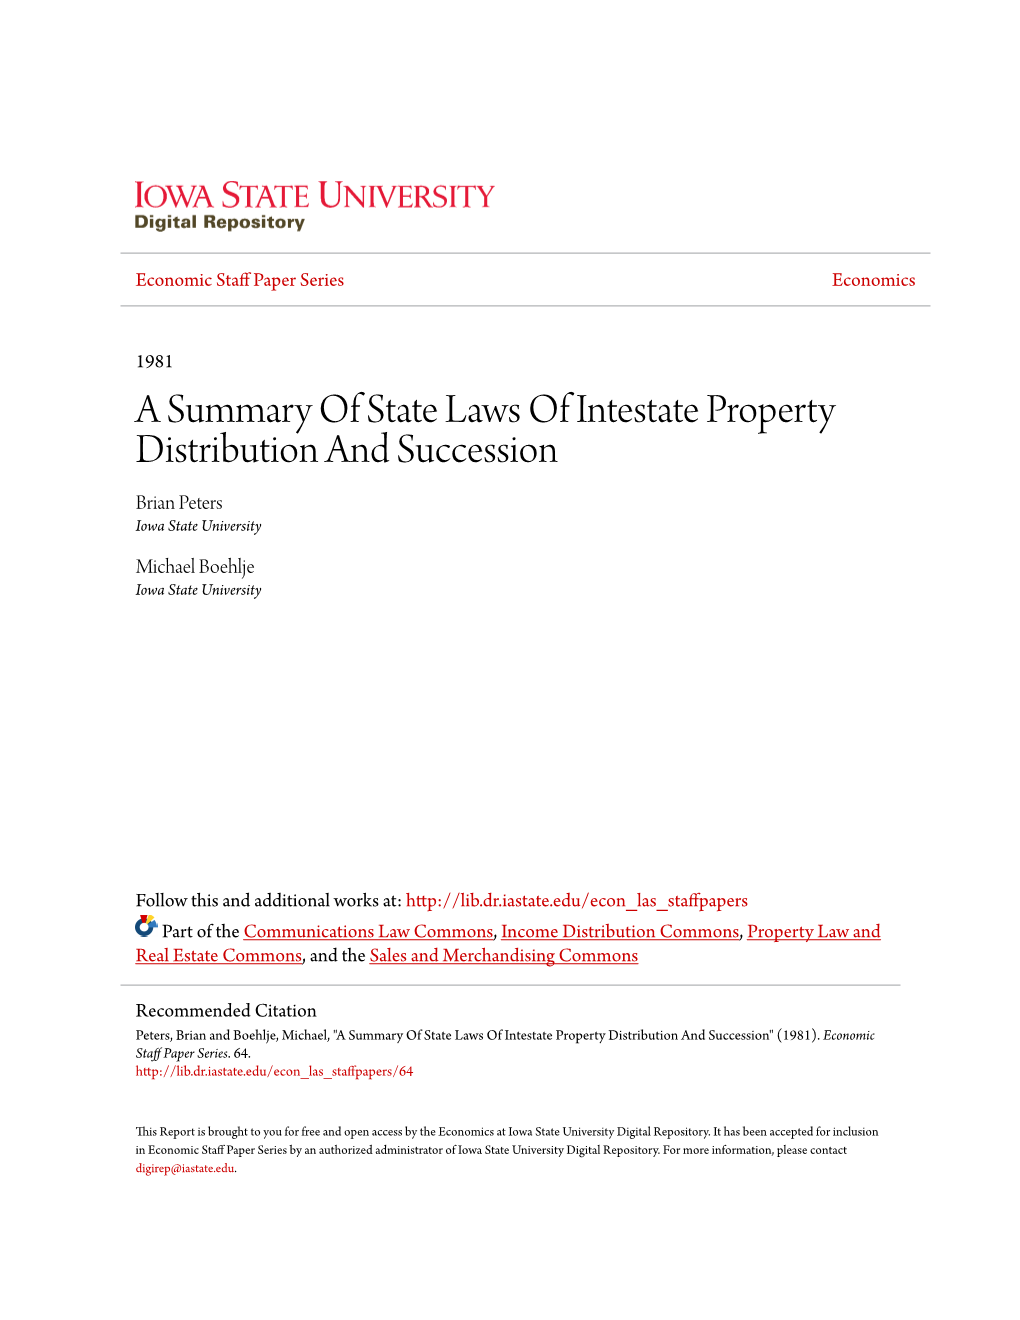 A Summary of State Laws of Intestate Property Distribution and Succession Brian Peters Iowa State University